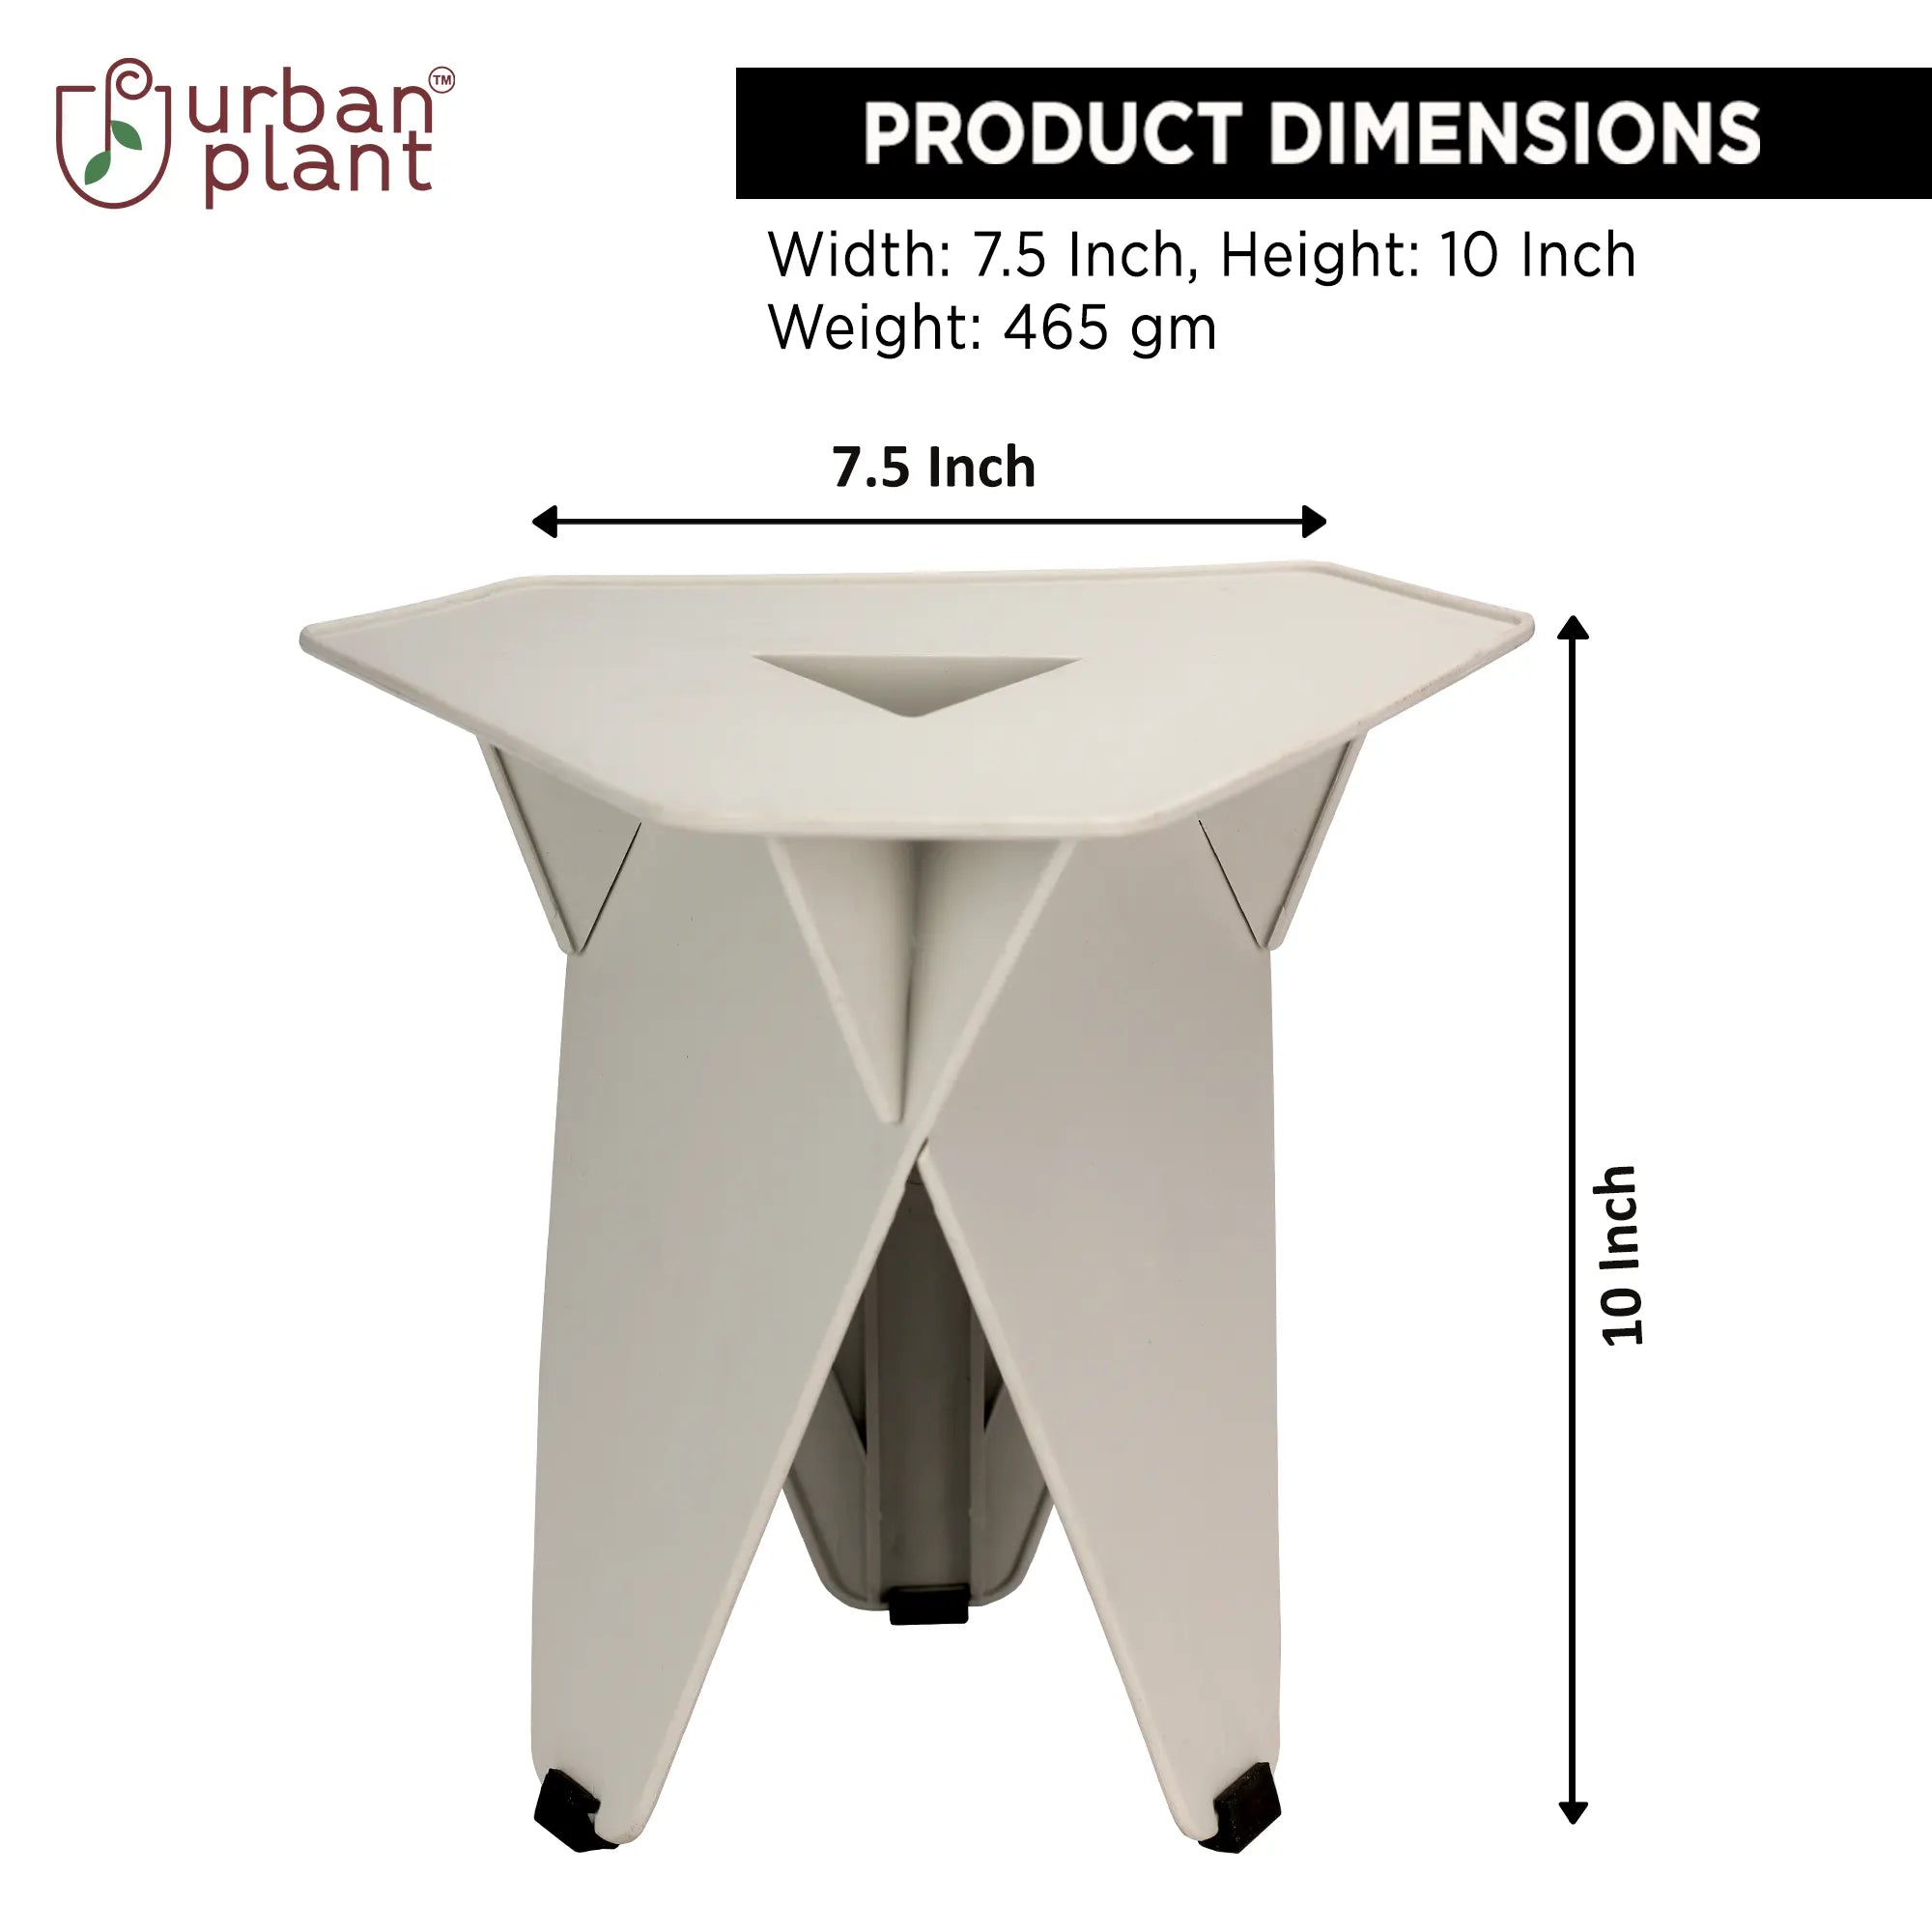 Dicito Wedge Side Table For Plant 10 inch Planter with Stand Urban Plant 